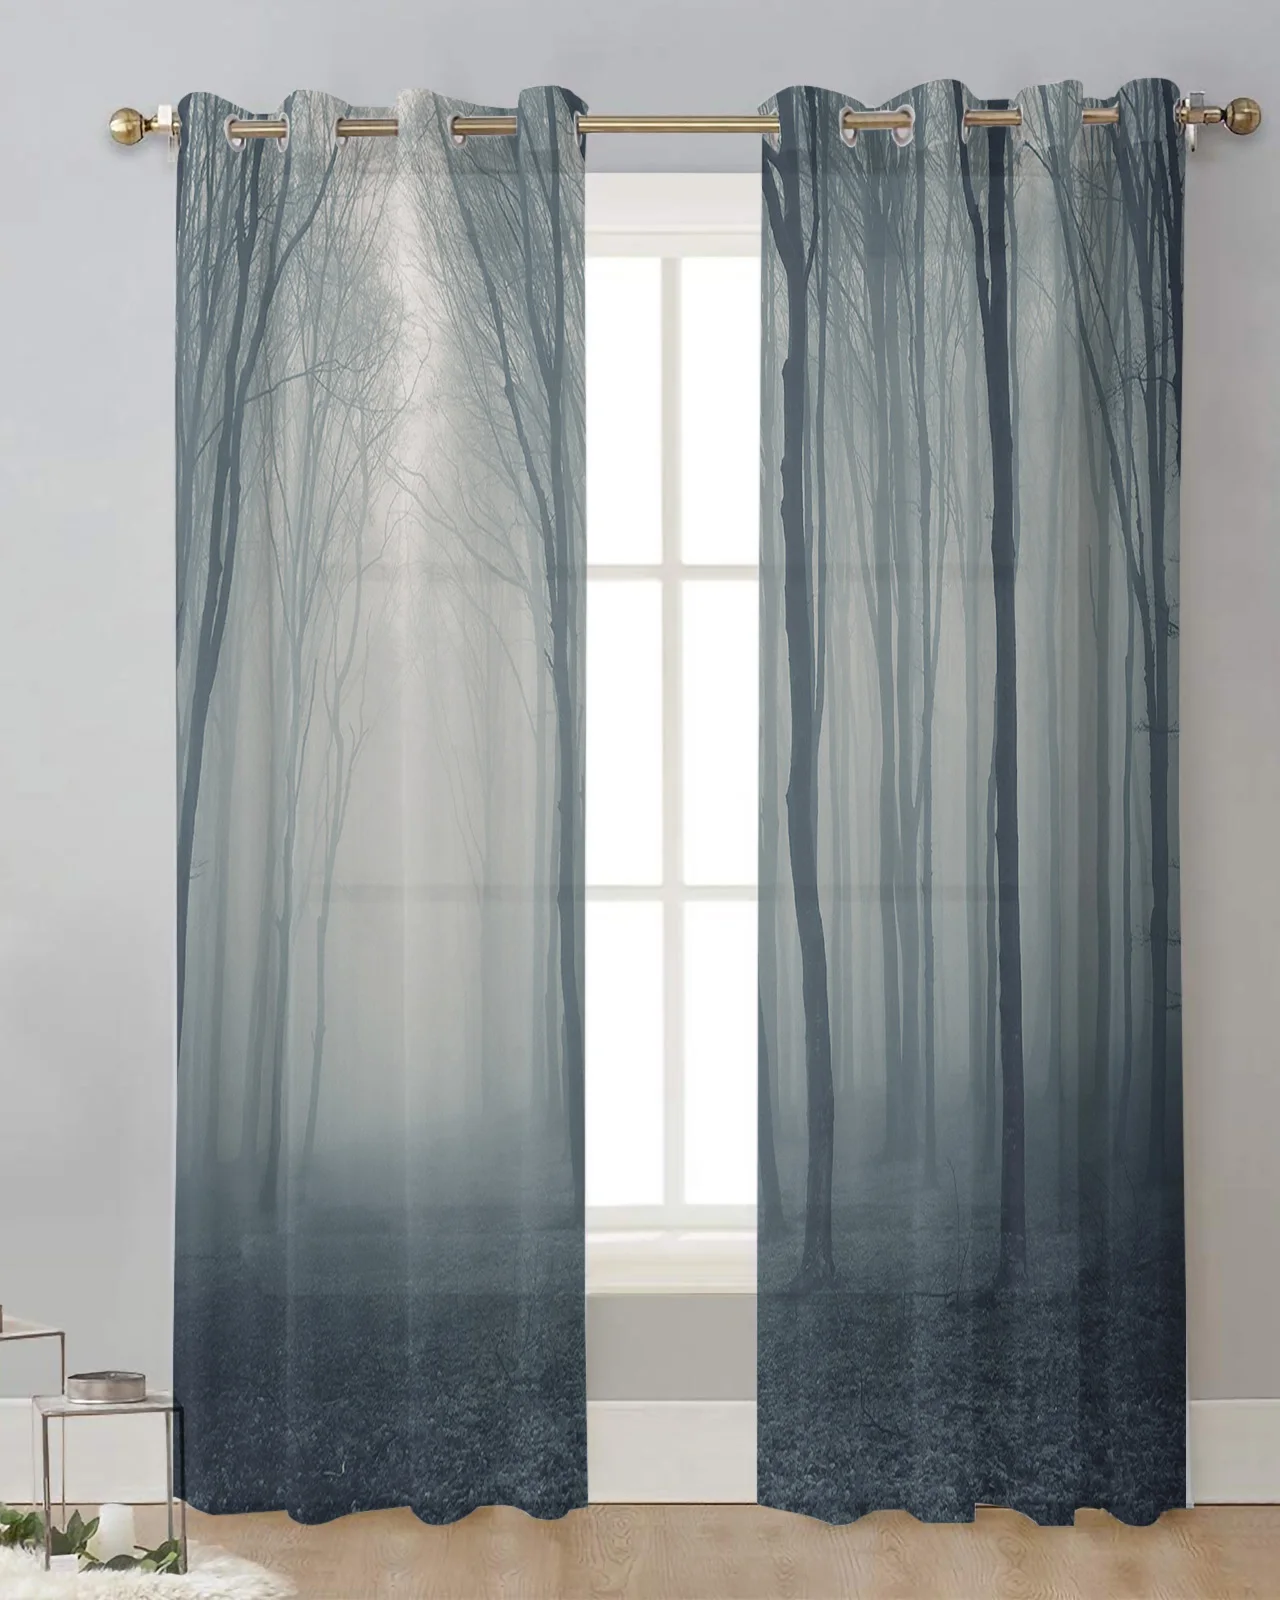 

Forest Fog Trees Branches Sheer Curtains for Living Room Bedroom Kitchen Voile Tulle Curtains Window Treatments